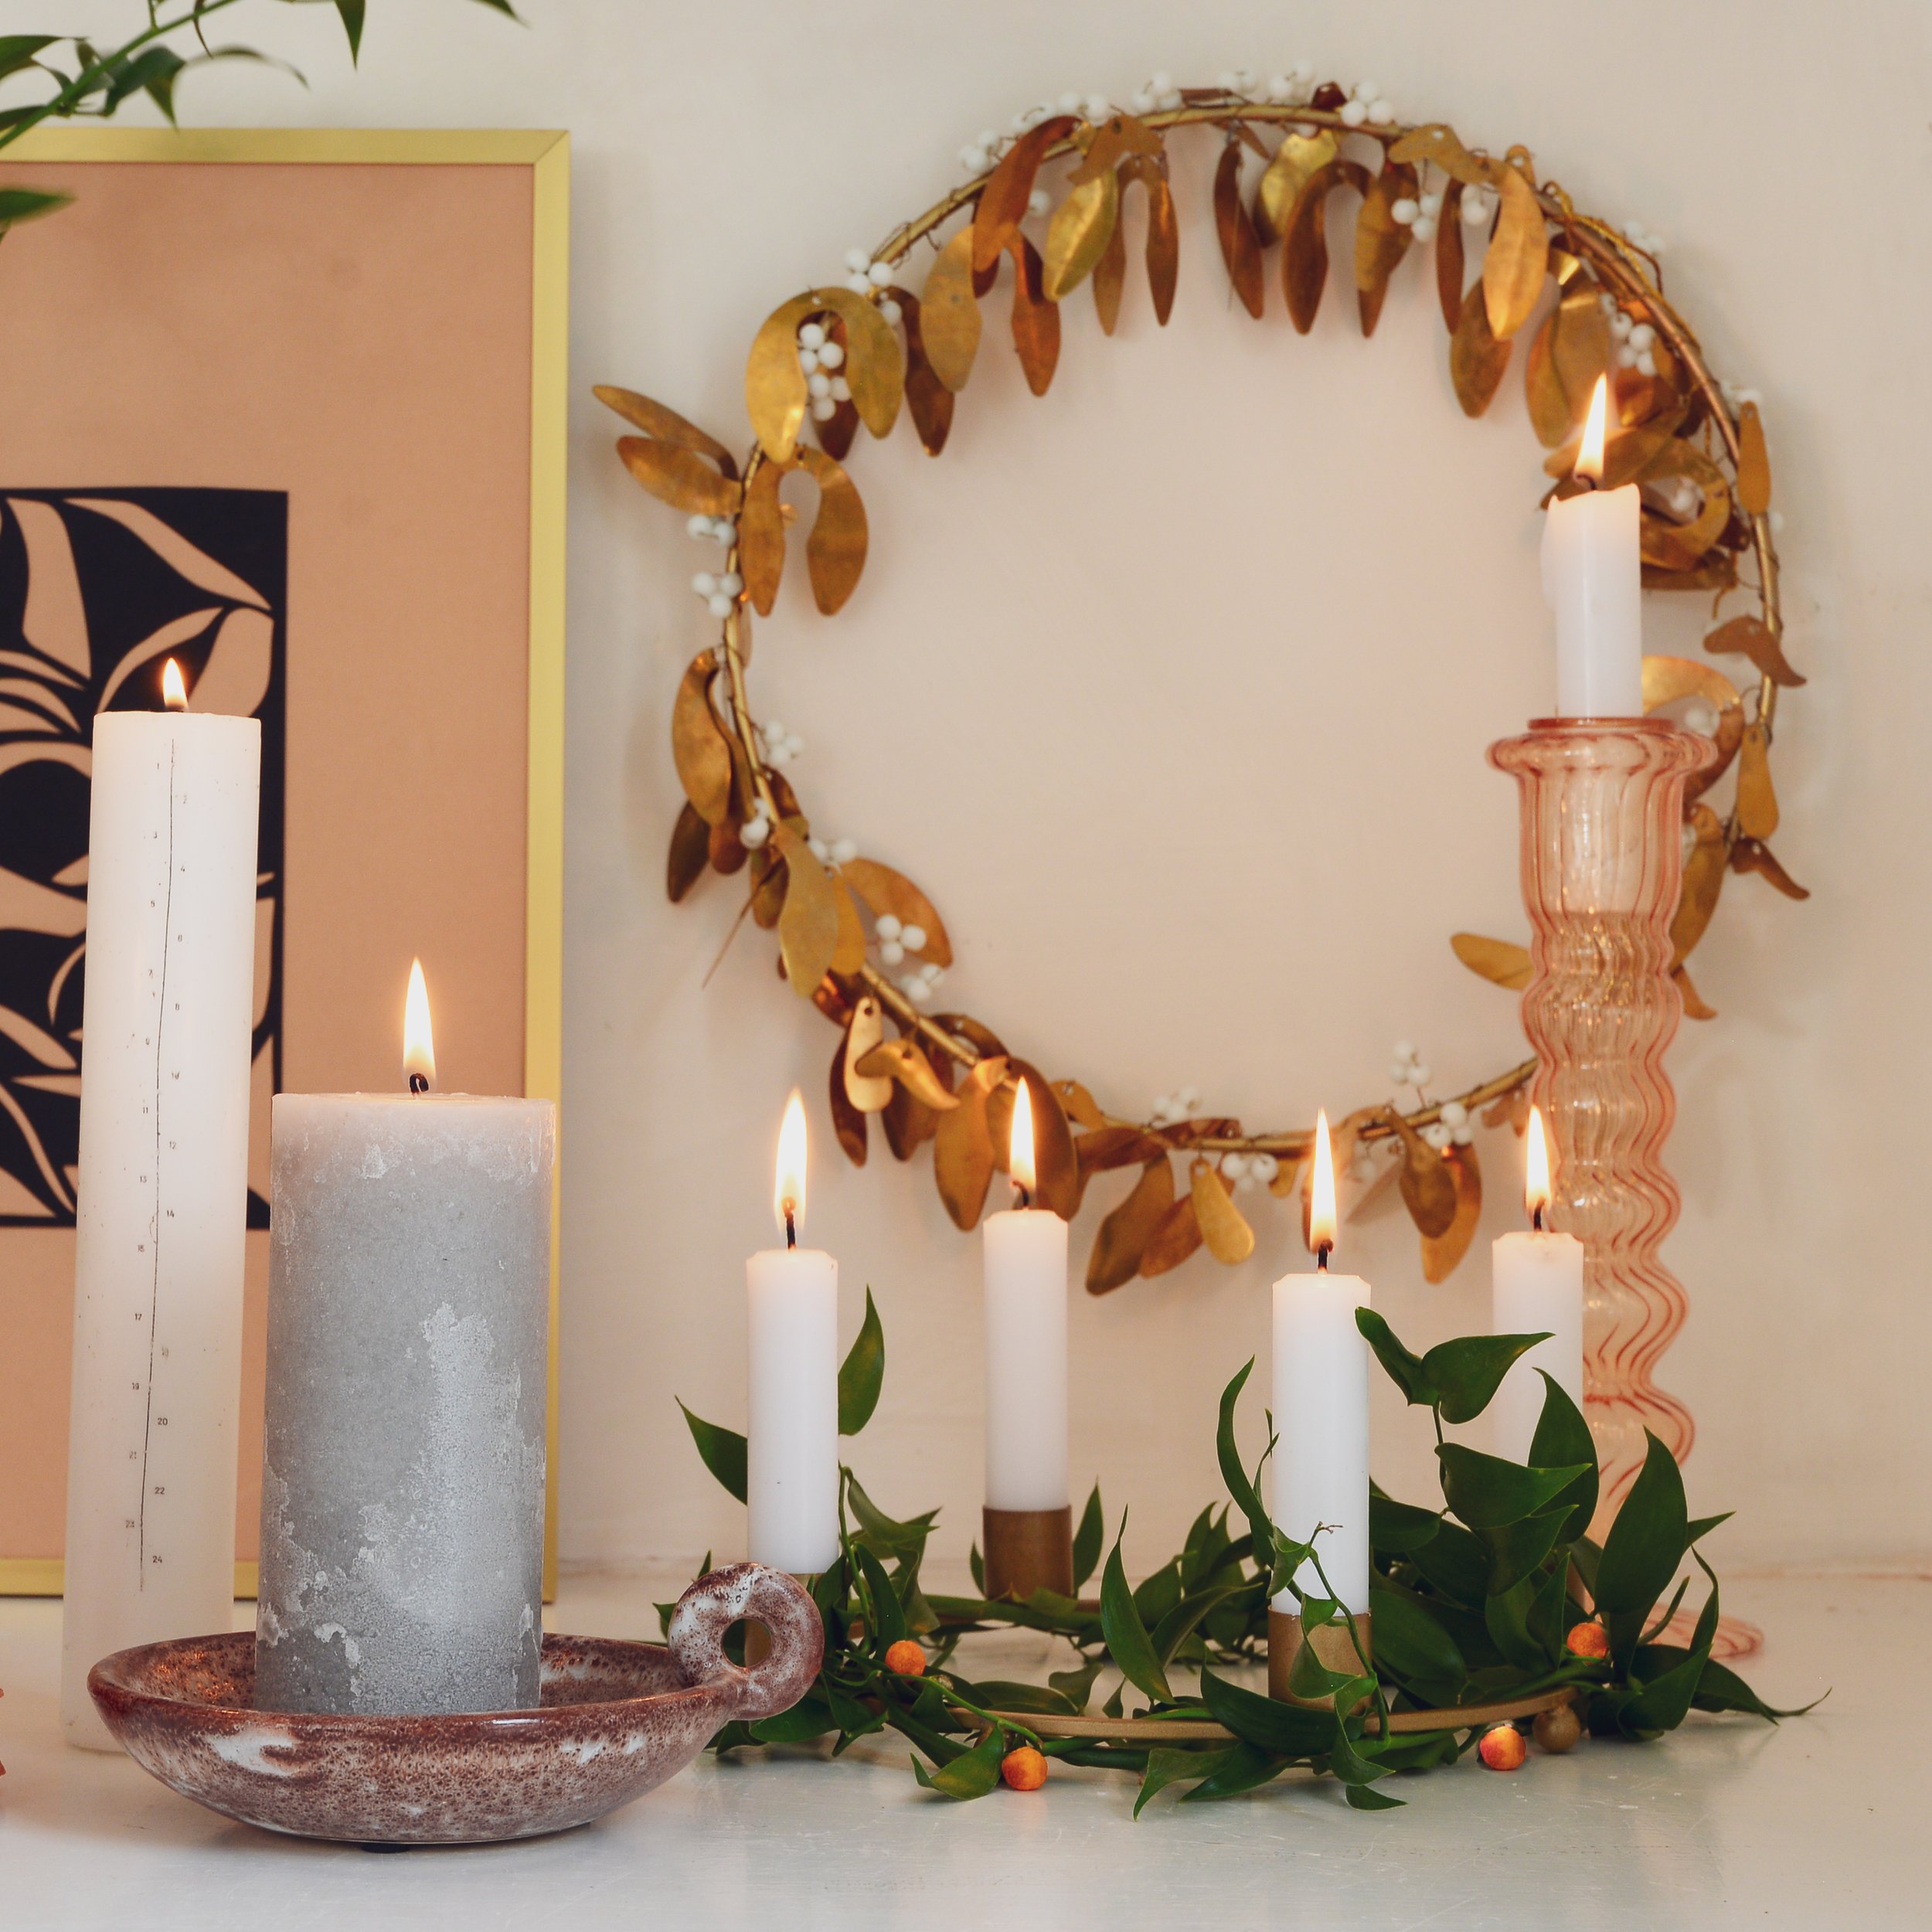 Christmas candles and gold wreath